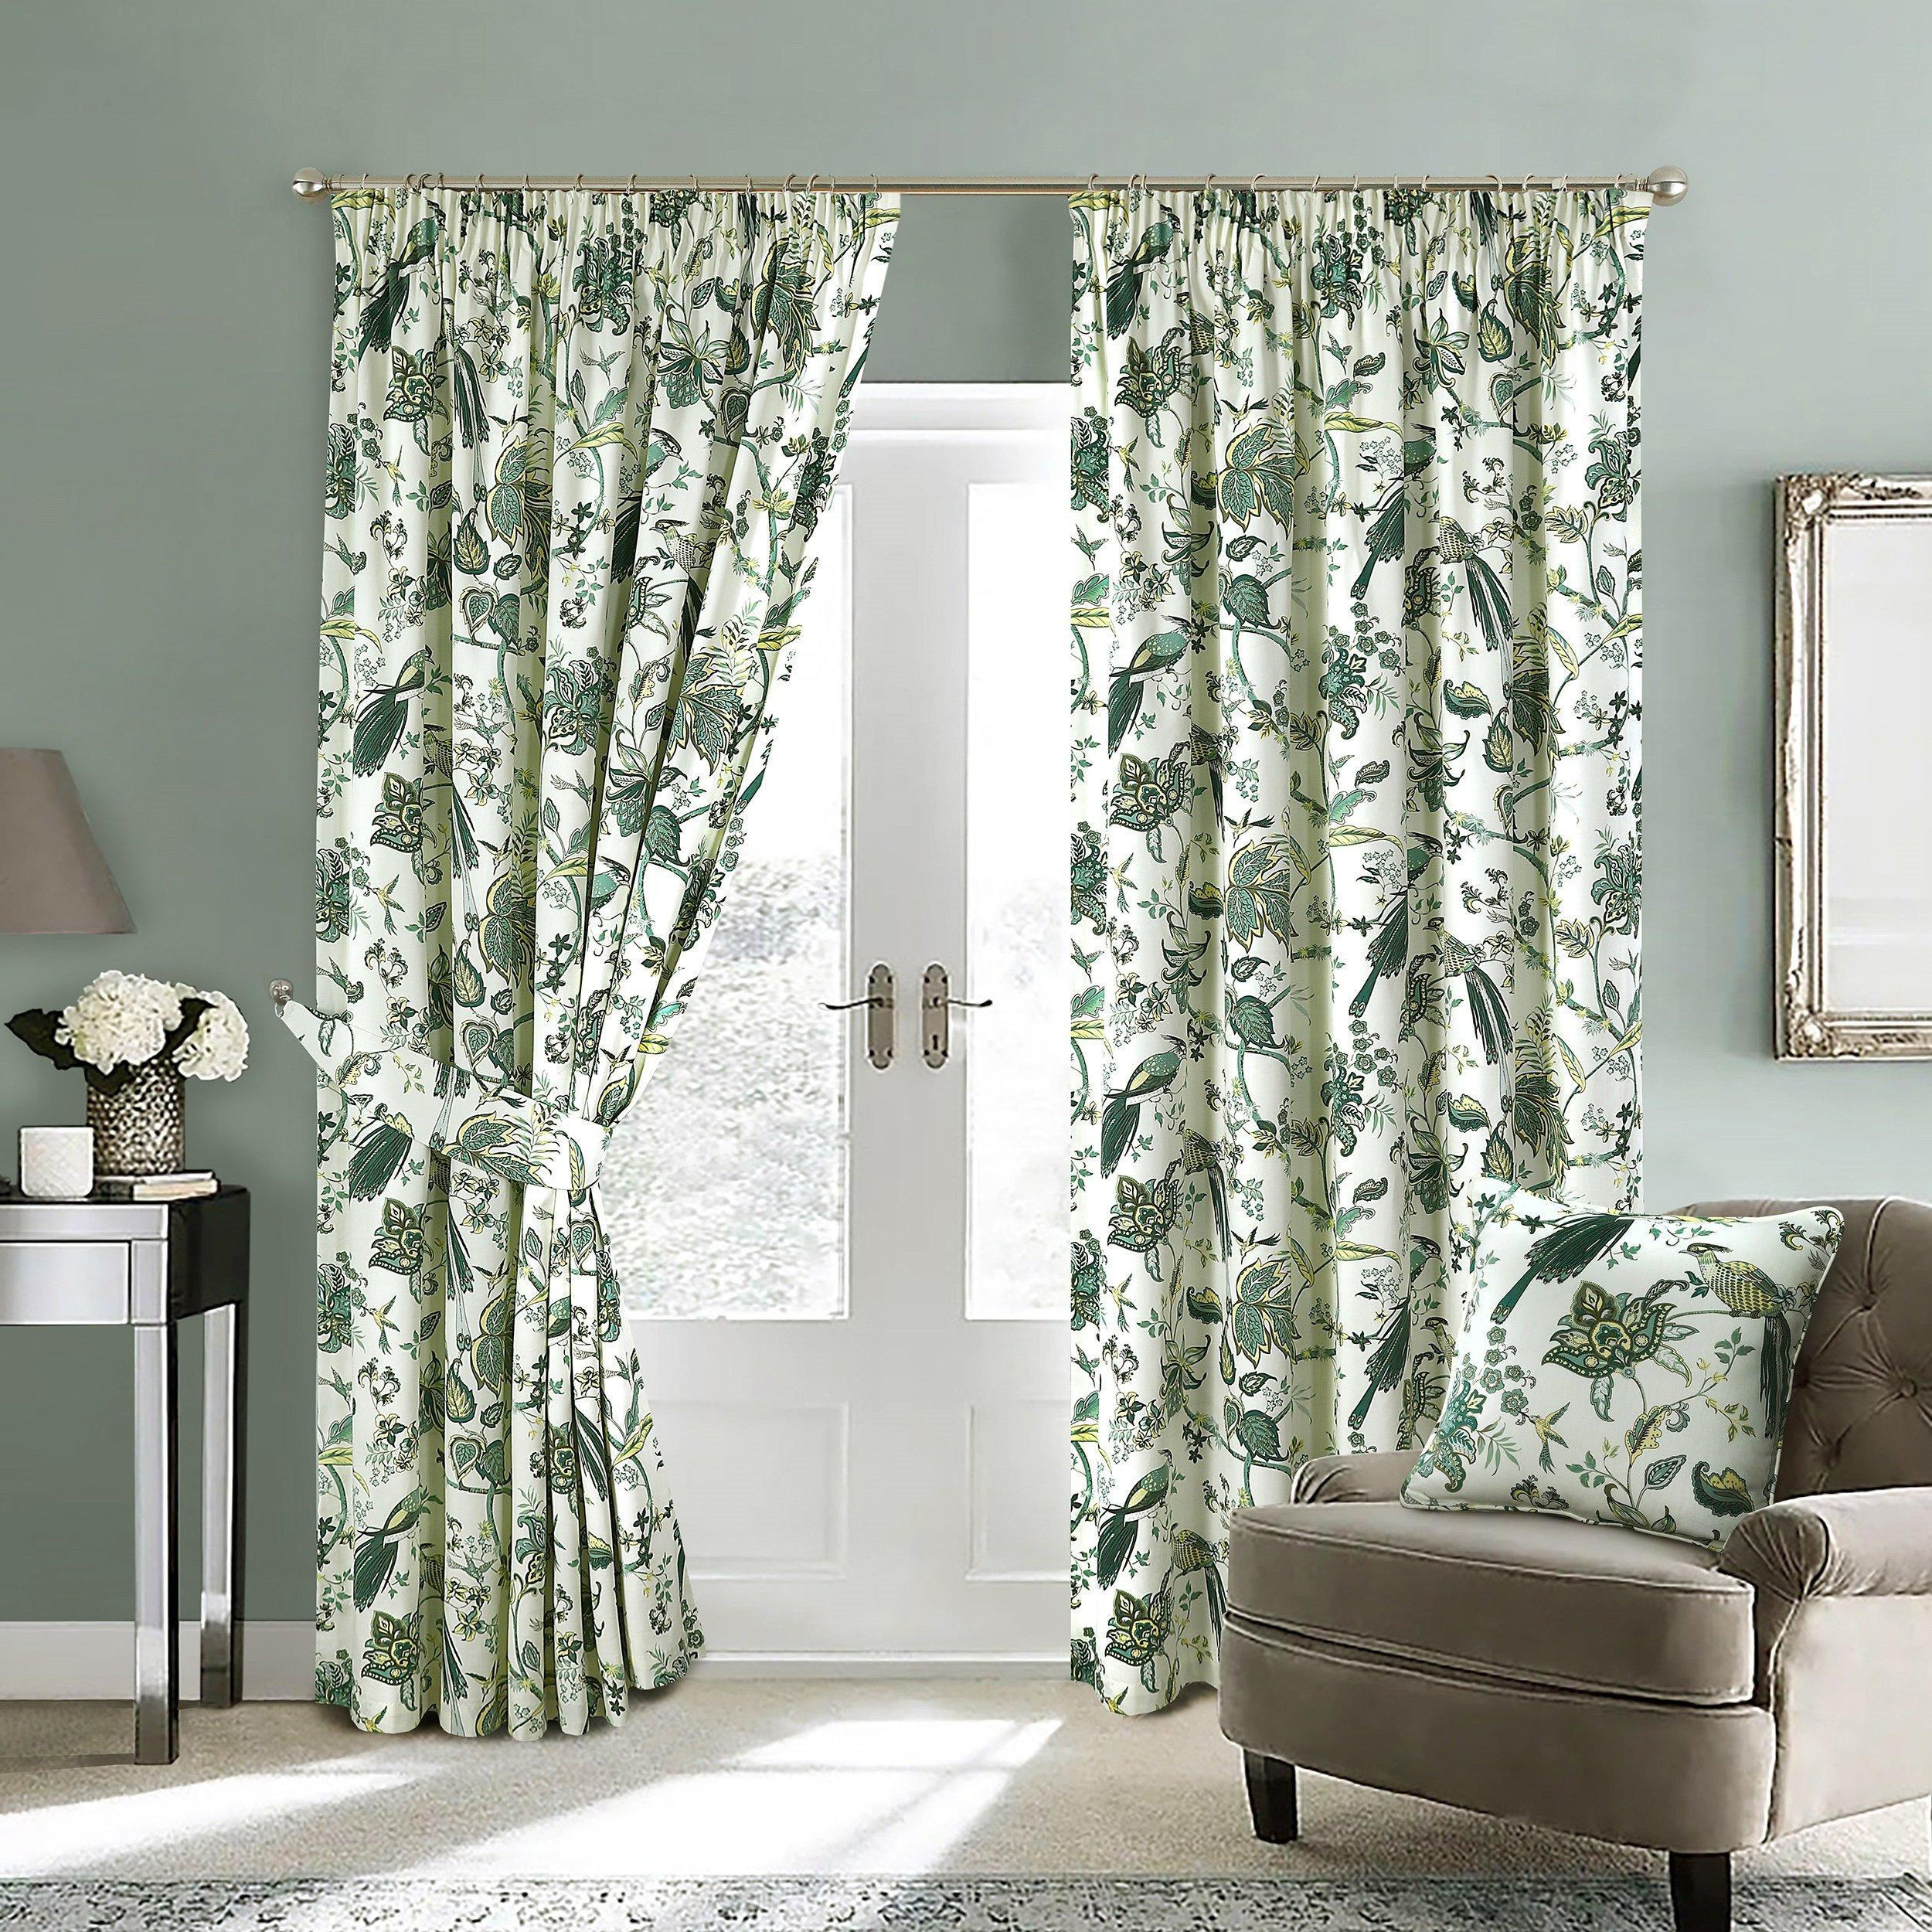 Kensington Fully Lined Botanical 3 inch Pencil Pleat Curtains pair by ...